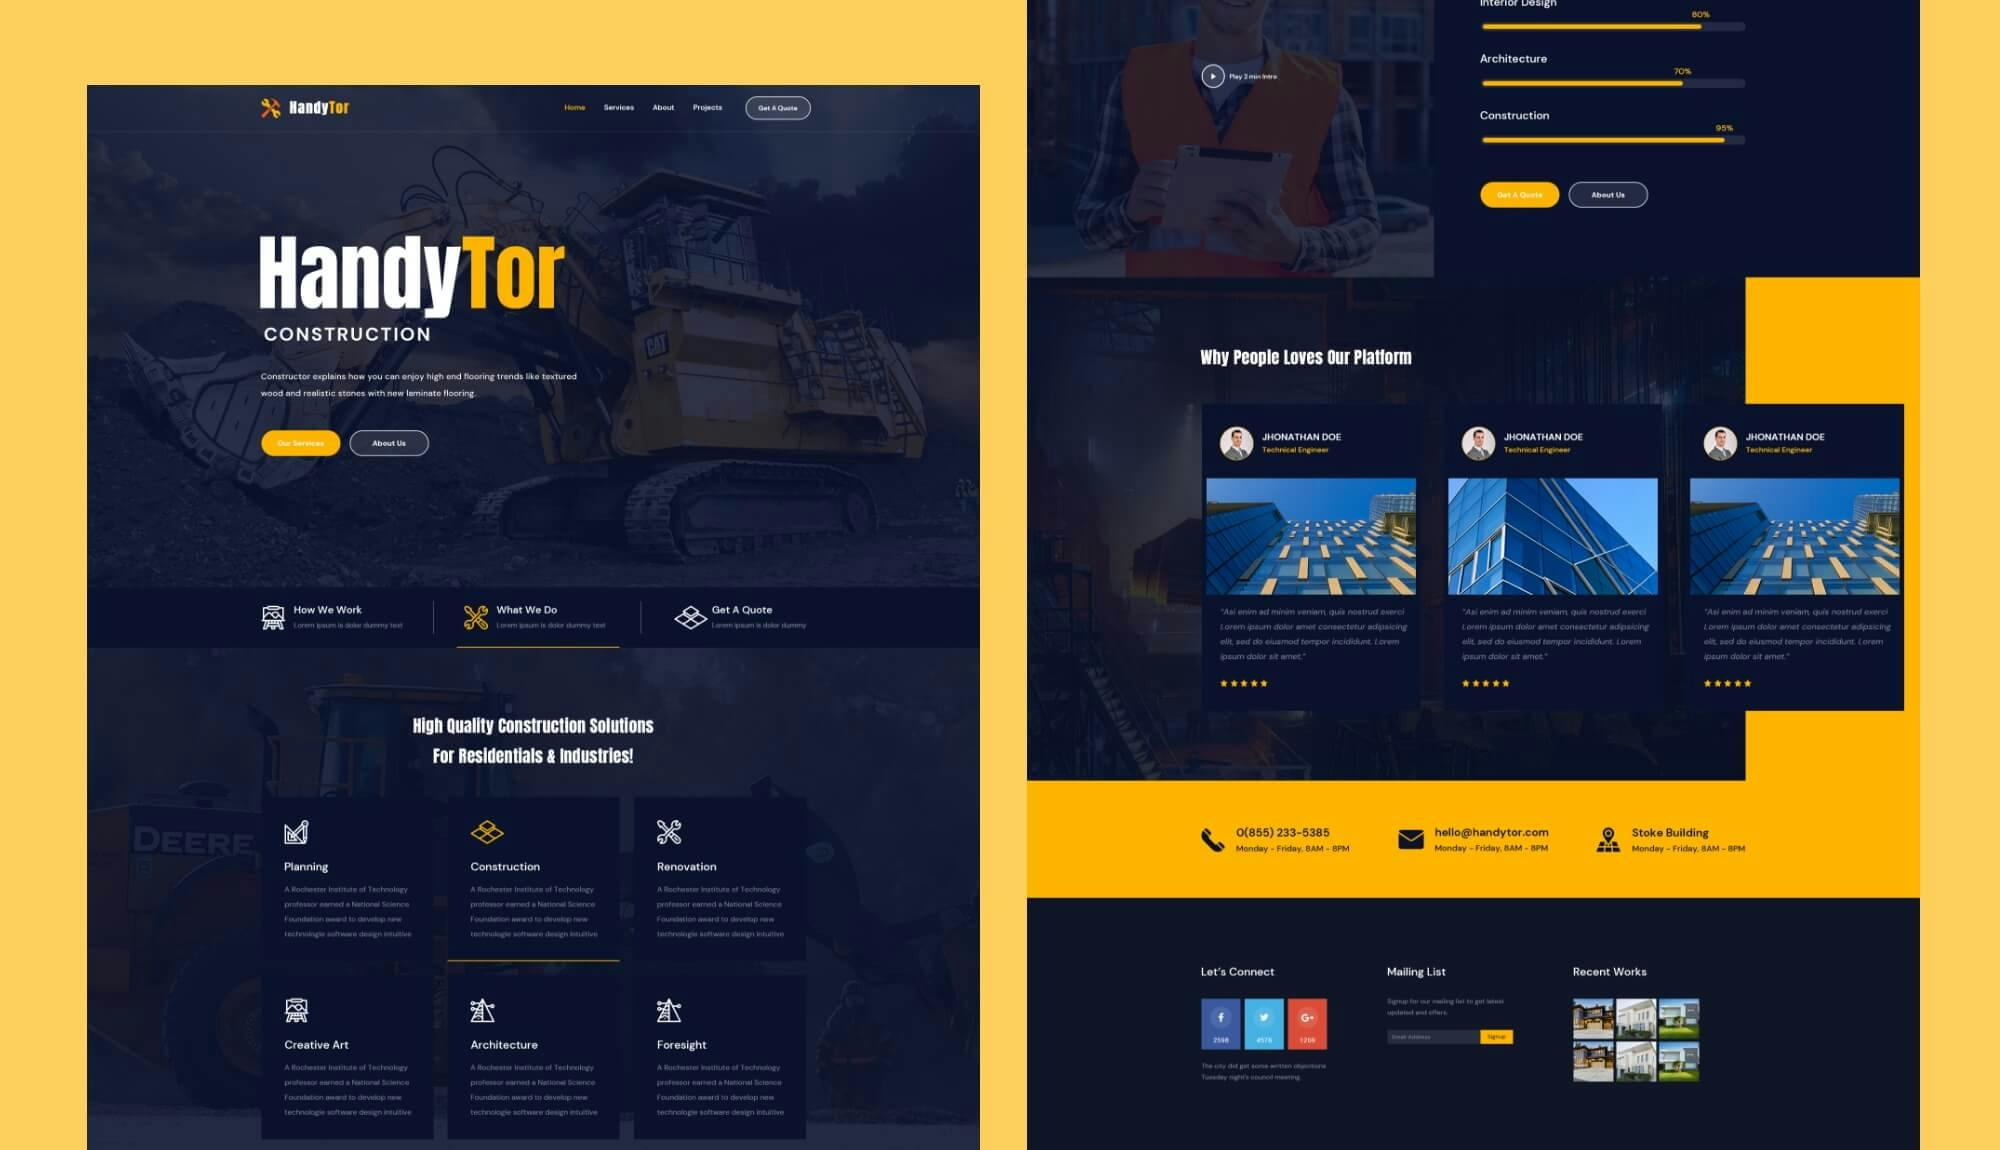 HandyTor Footer Section Banner